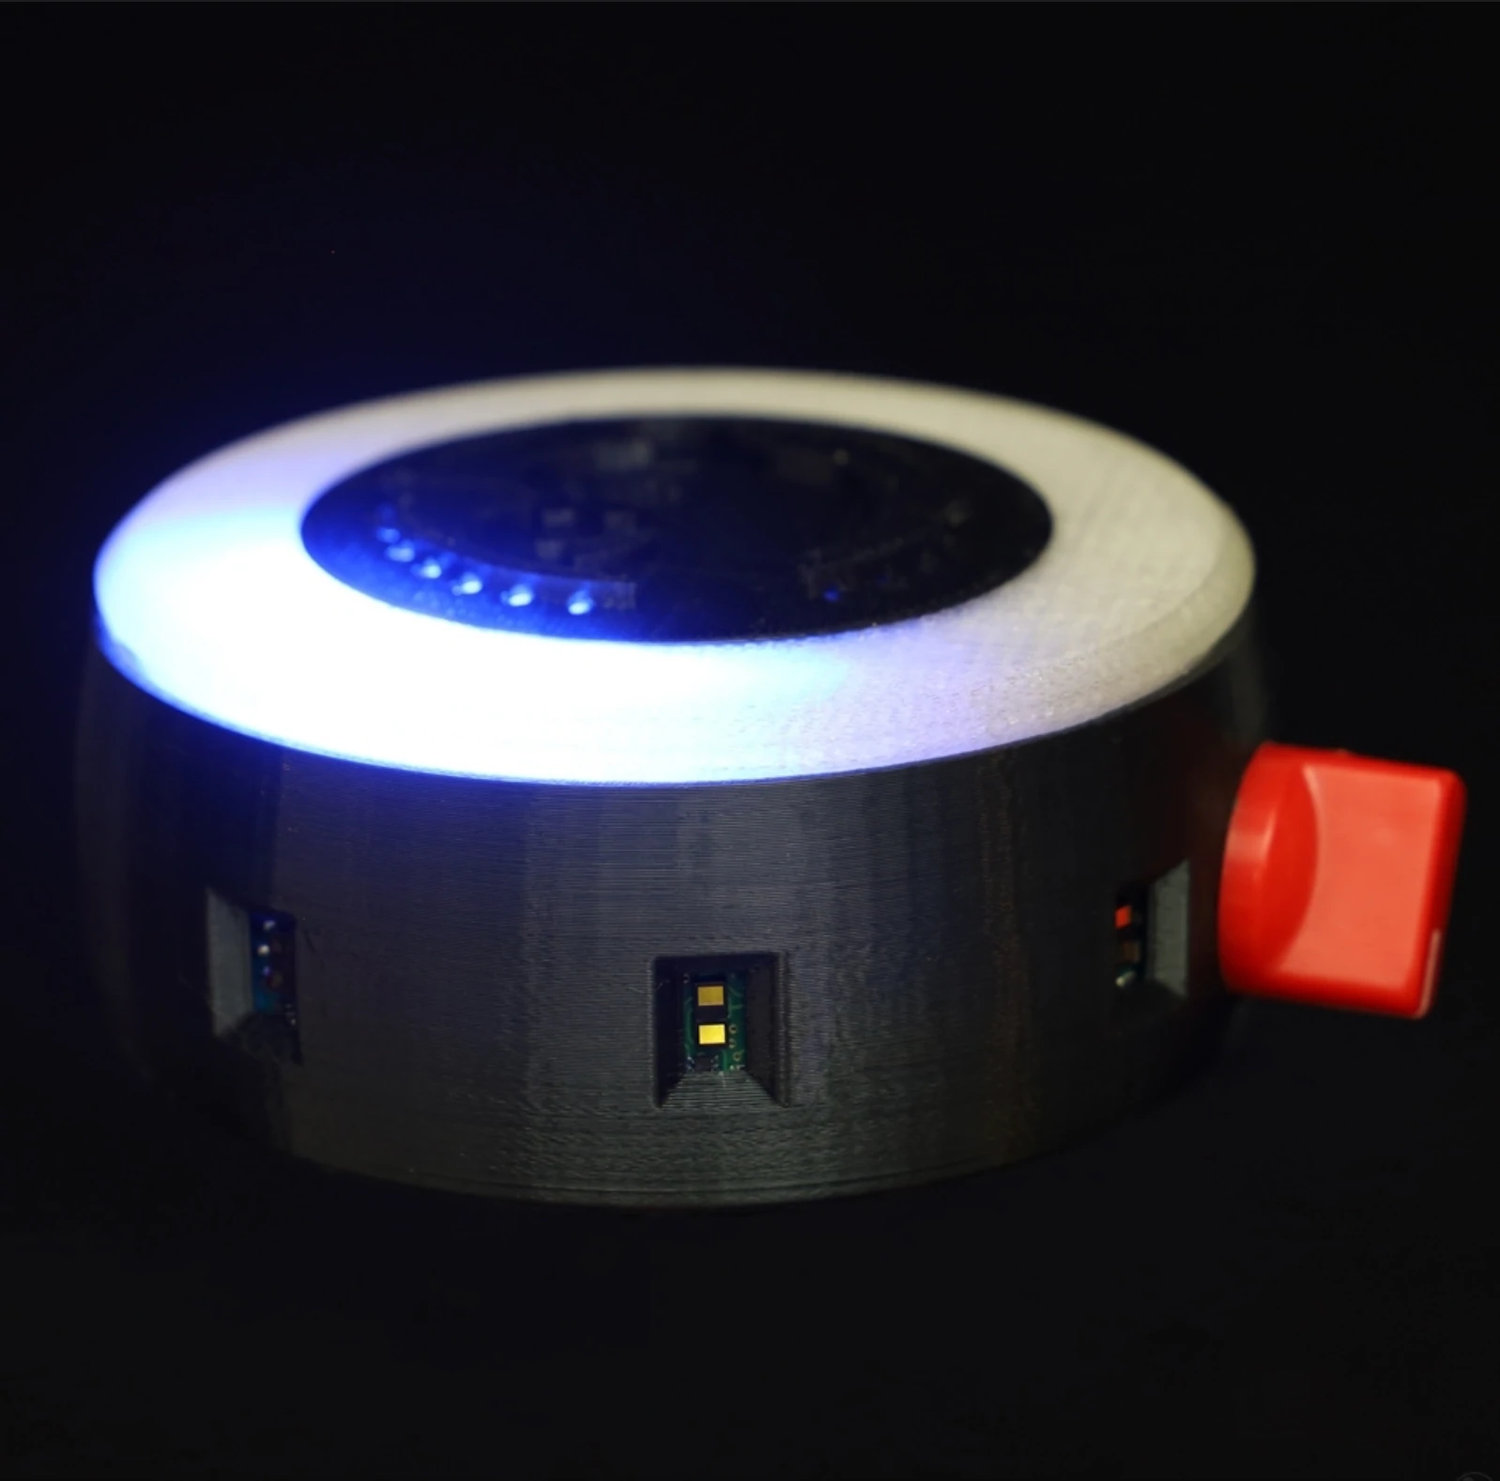 Motion and Vibration Sensors for Ghost Hunting | OzParaTech